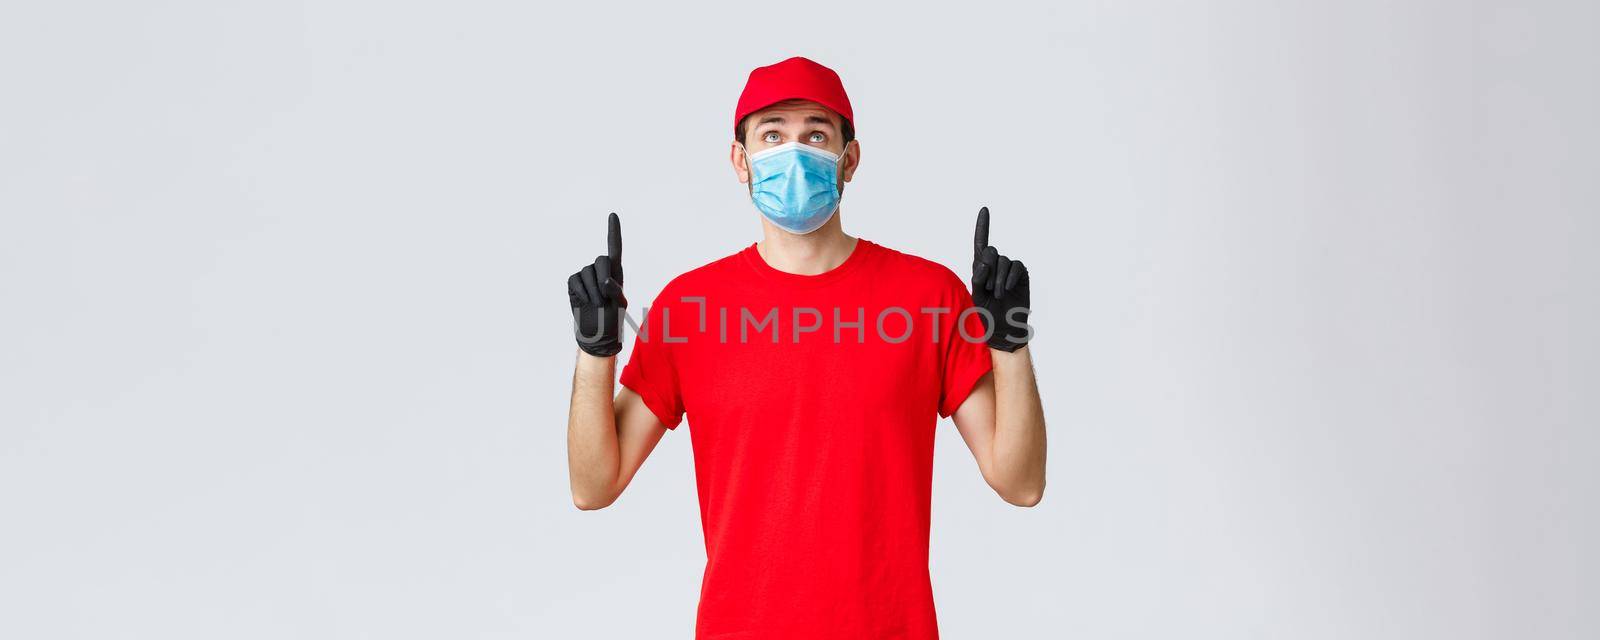 Covid-19, self-quarantine, online shopping and shipping concept. Curious delivery guy in red cap, t-shirt, medical mask and gloves, deliver self-quarantine orders to clients, looking pointing up.